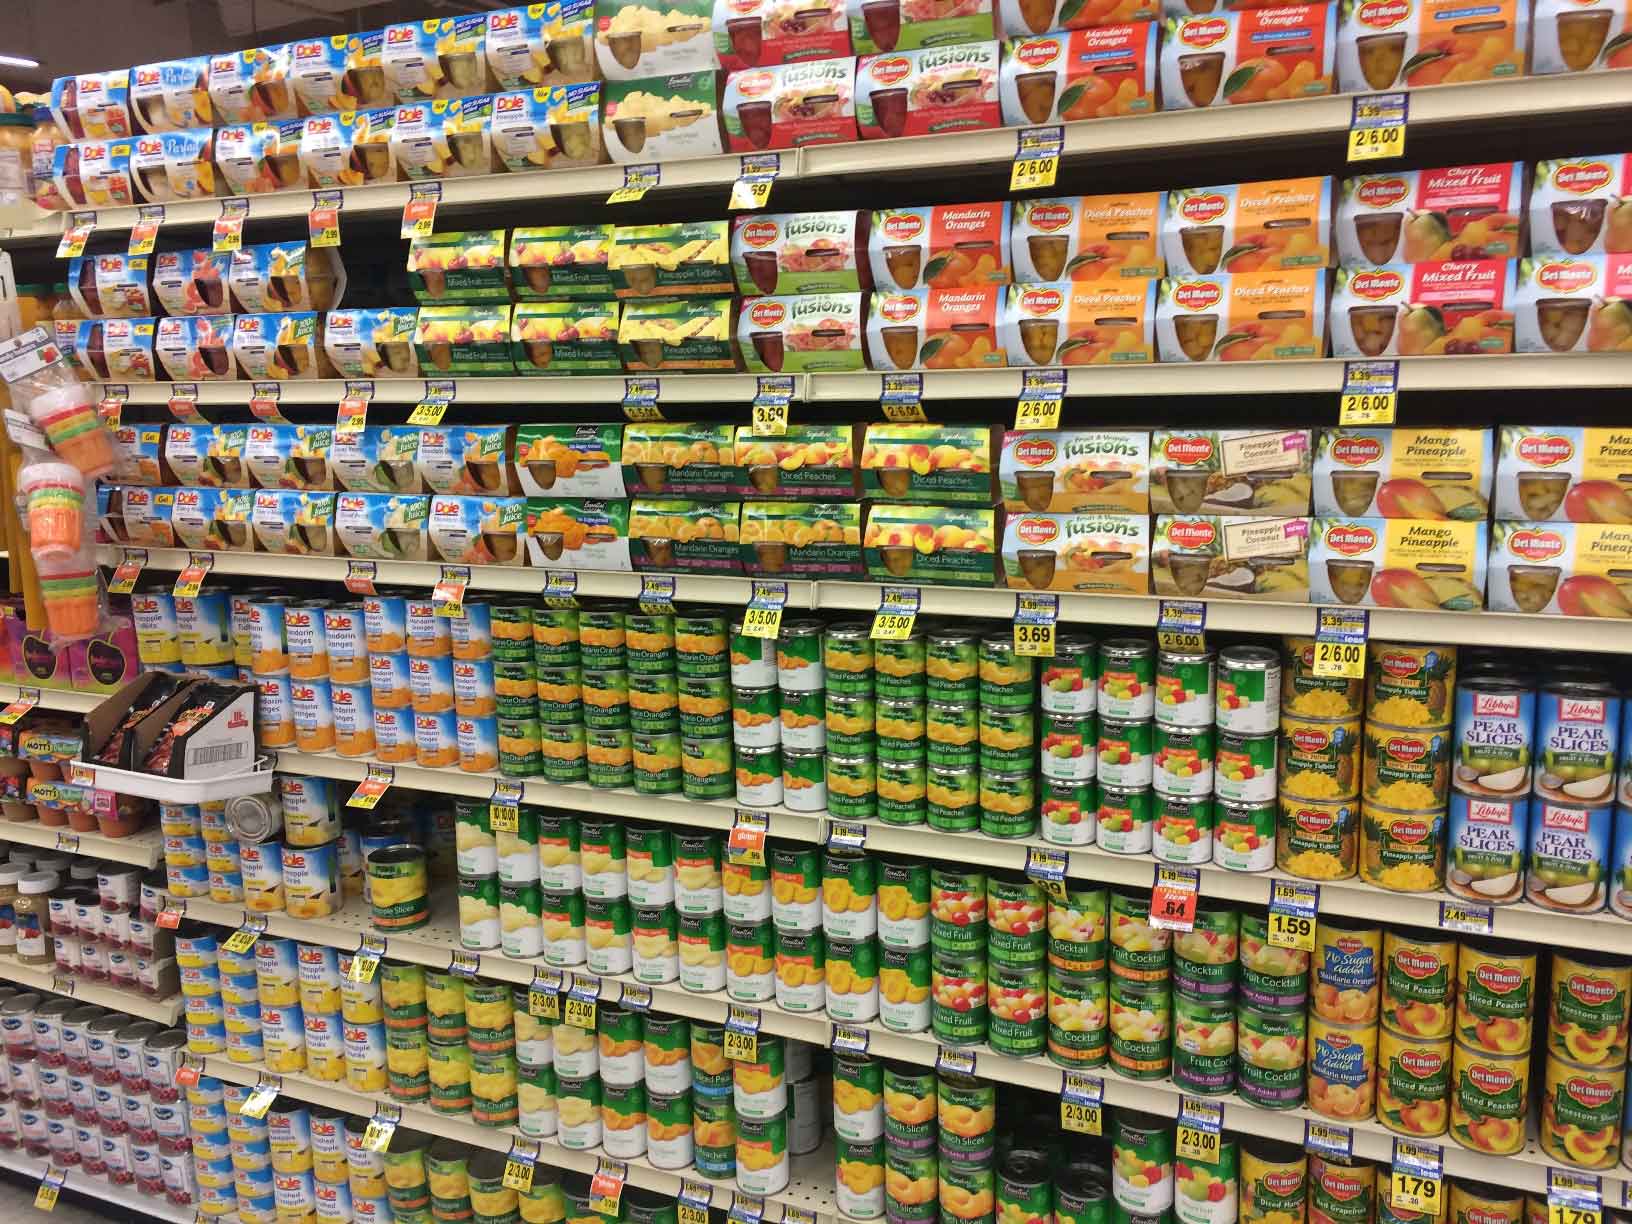 Canned Goods Aisle